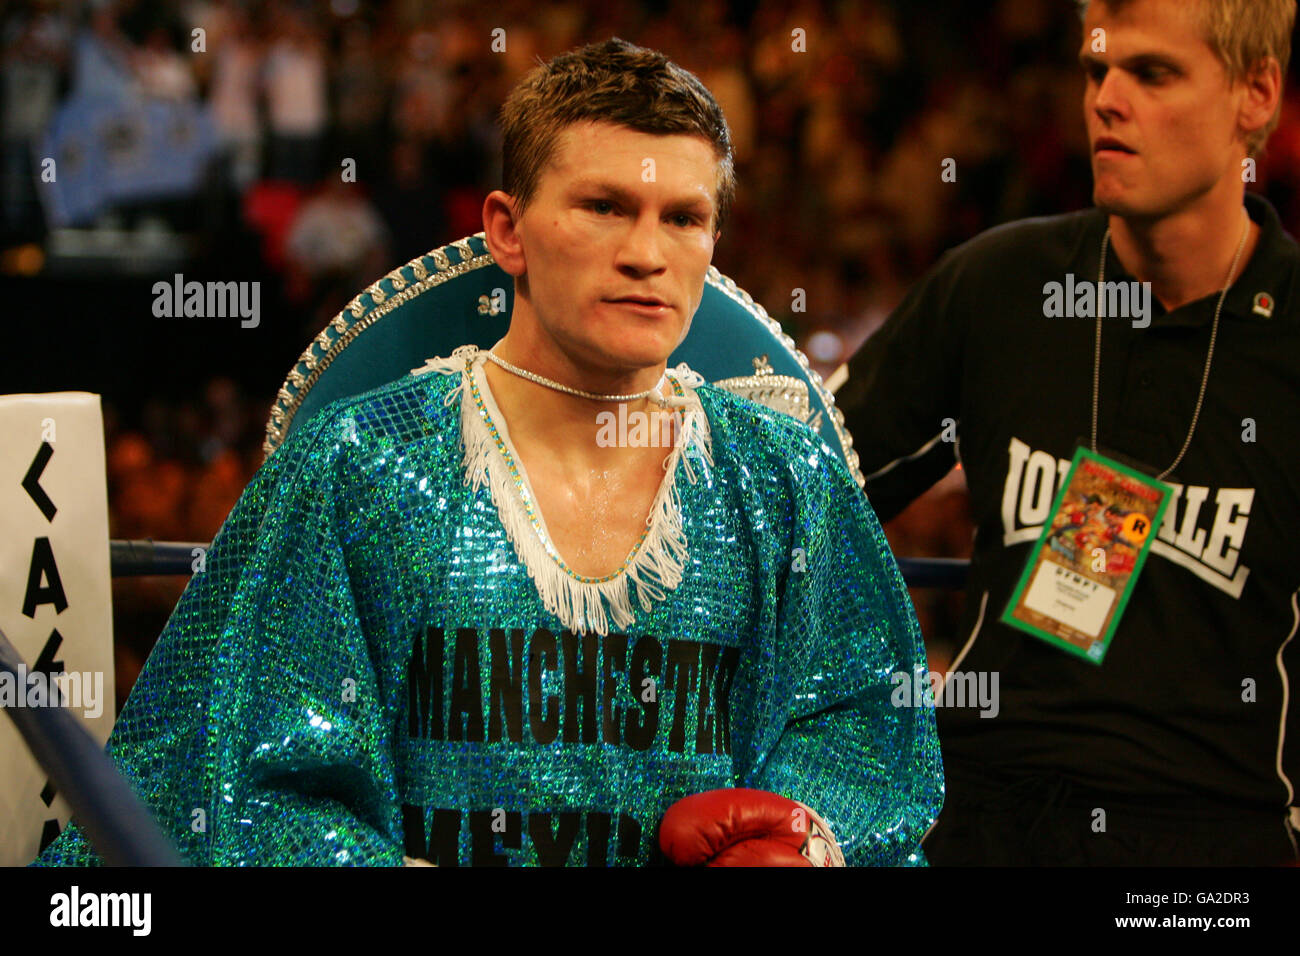 Boxer Ricky Hatton, of England, is introduced before his junior welterweight boxing match against Jose Luis Castillo, of Mexico, in Las Vegas, Saturday, June 23, 2007. Hatton won the fight with a fourth round knockout at the Thomas Mack Centre Las Vegas, Nevada, USA Stock Photo